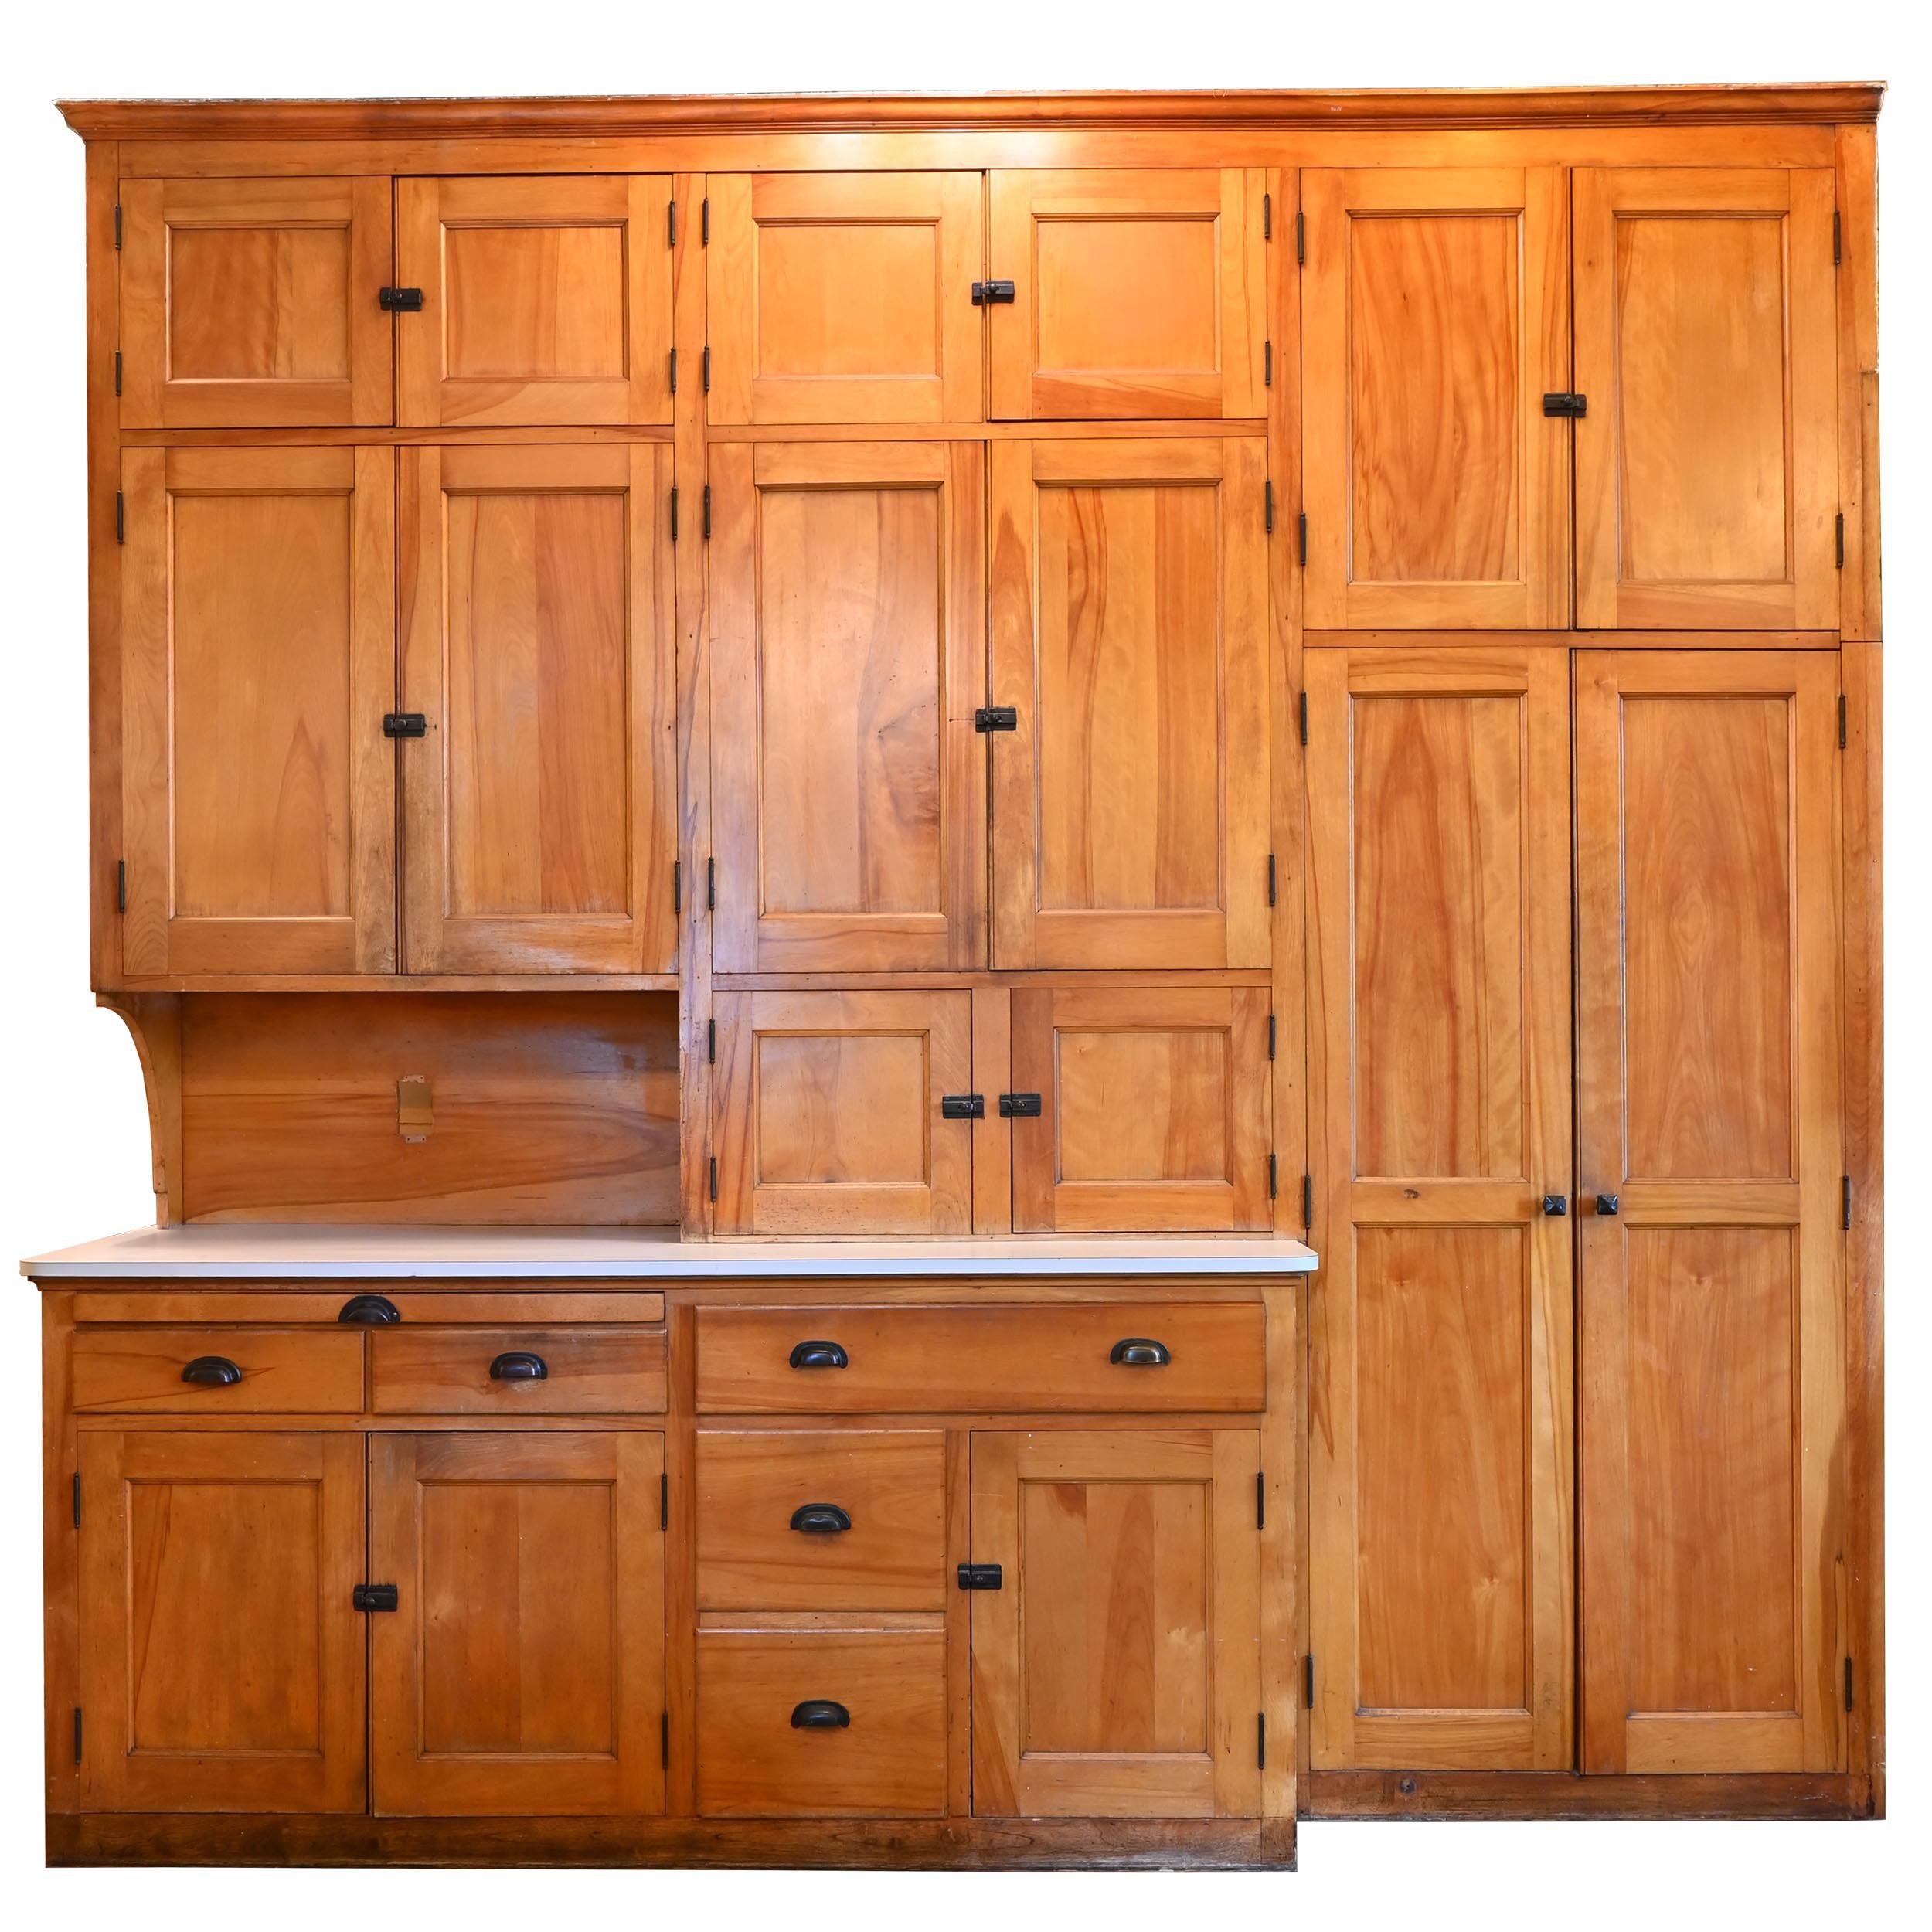 woodwork, built-ins & cabinetry — ARCHITECTURAL ANTIQUES